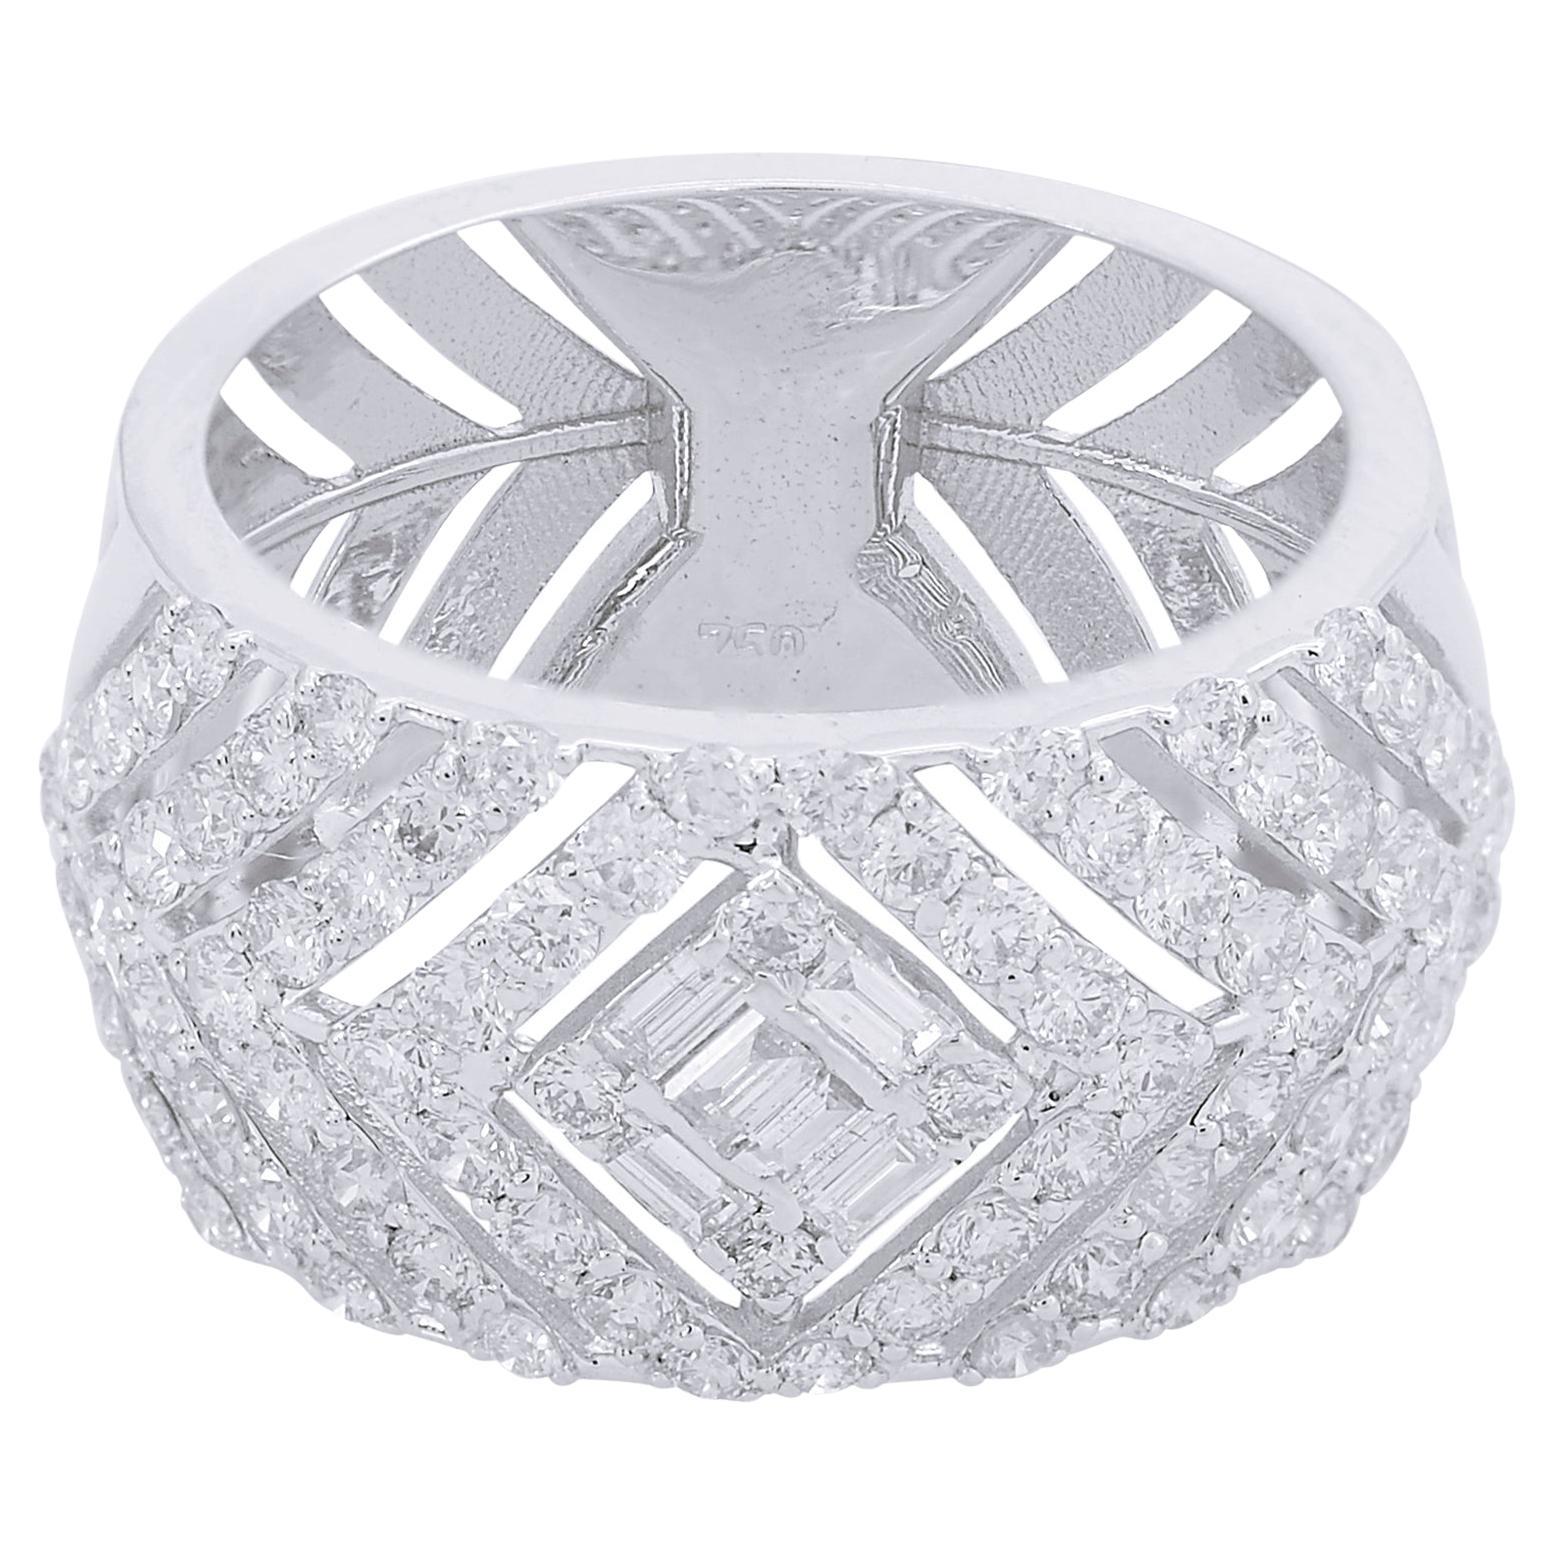 For Sale:  1.7 Carat SI Clarity HI Color Pave Diamond Band Ring 18 Karat White Gold Jewelry